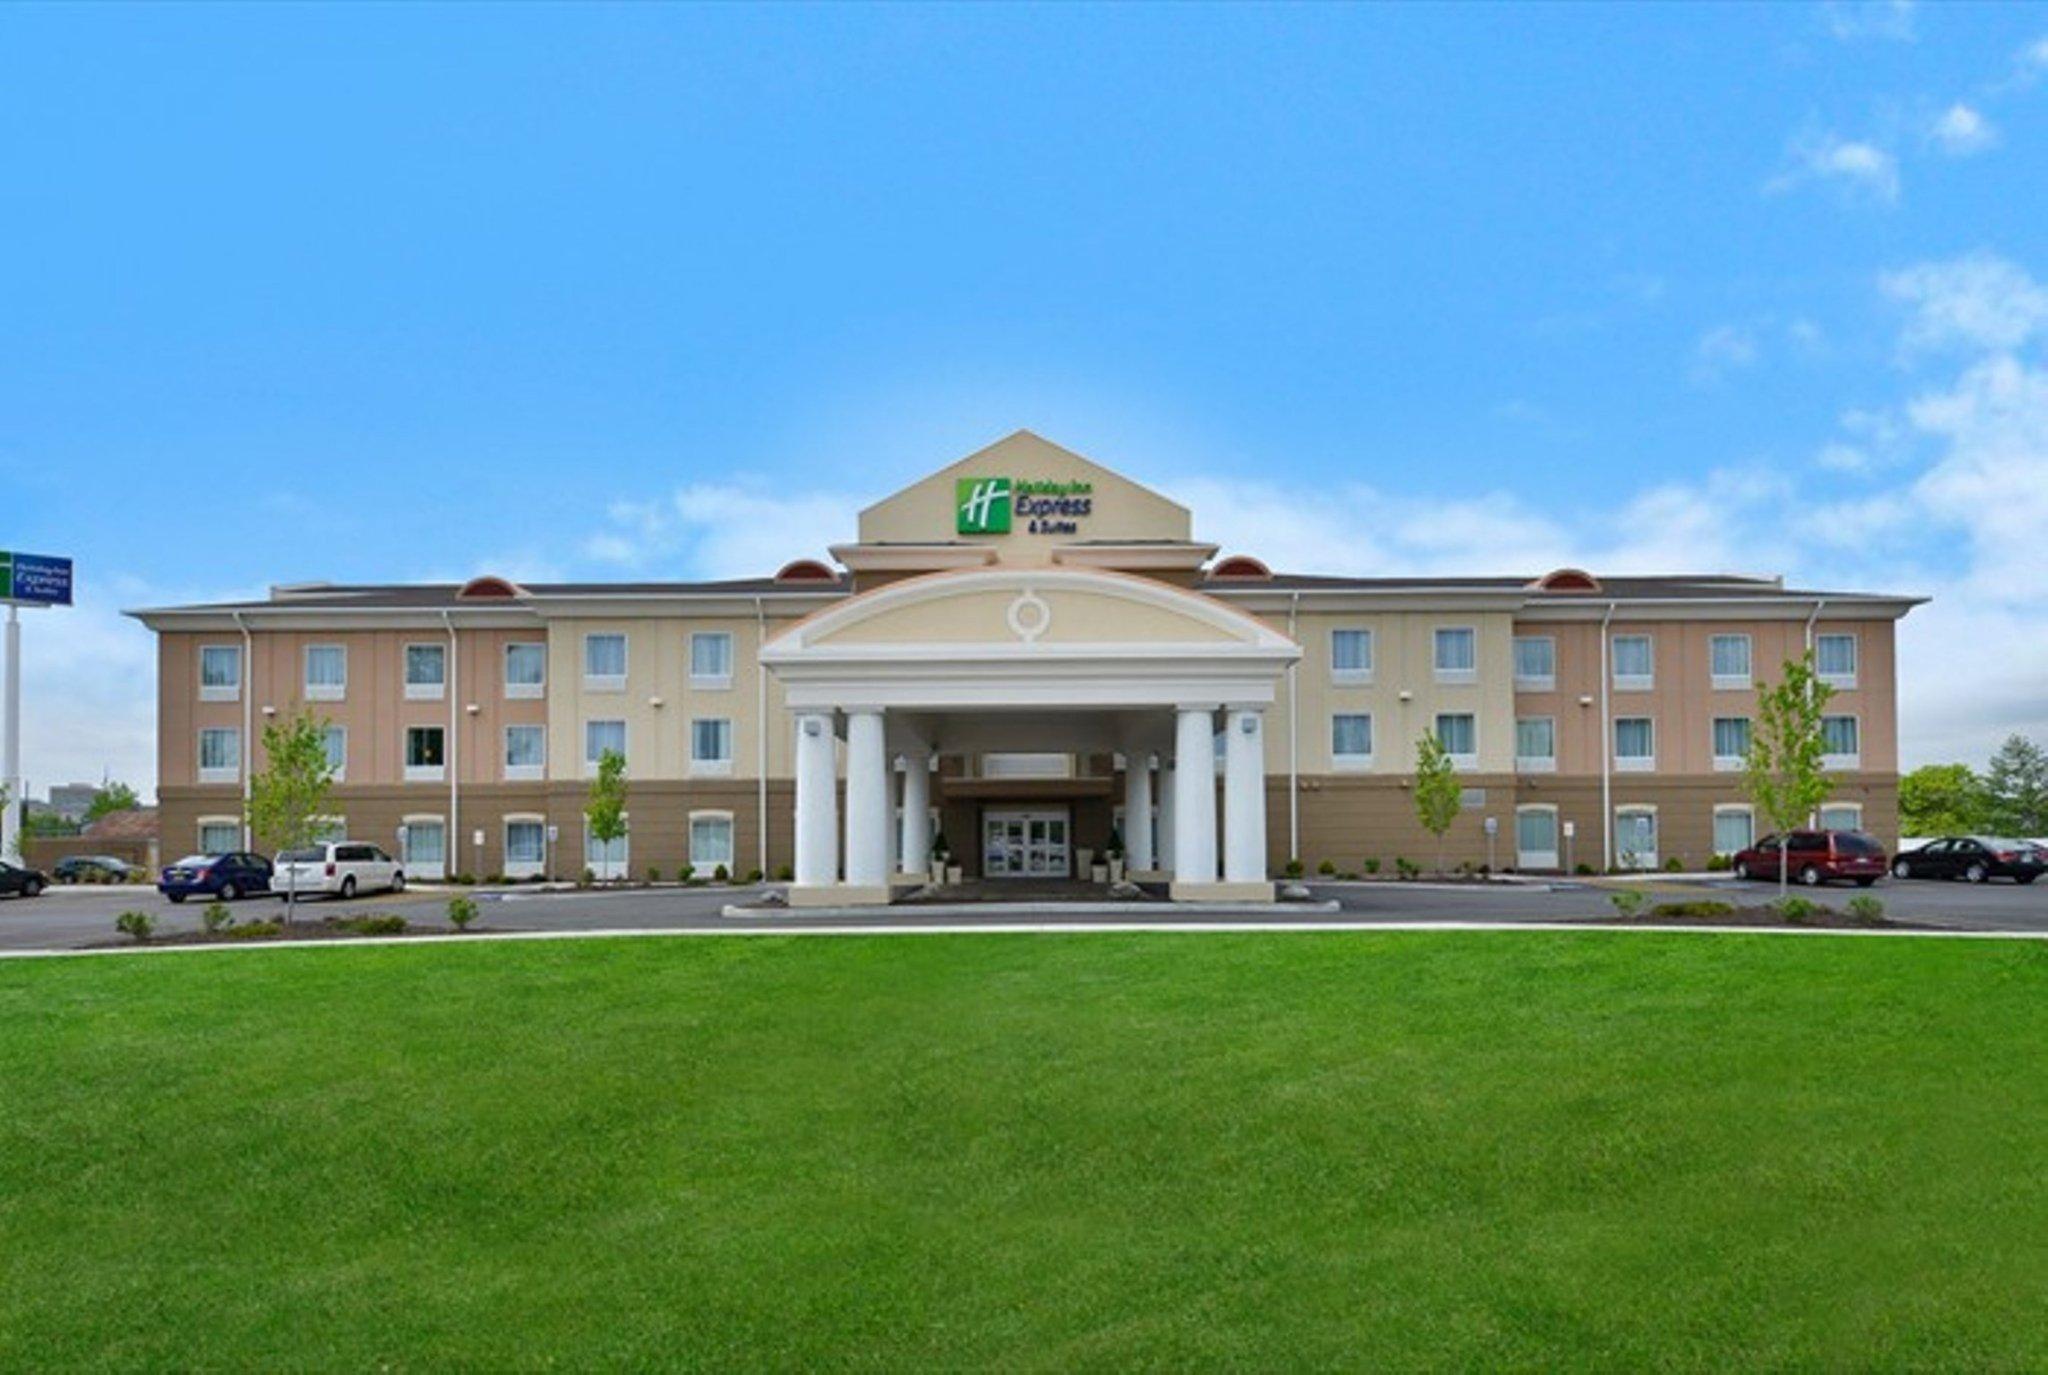 Holiday Inn Express Hotel & Suites Utica in Utica, NY